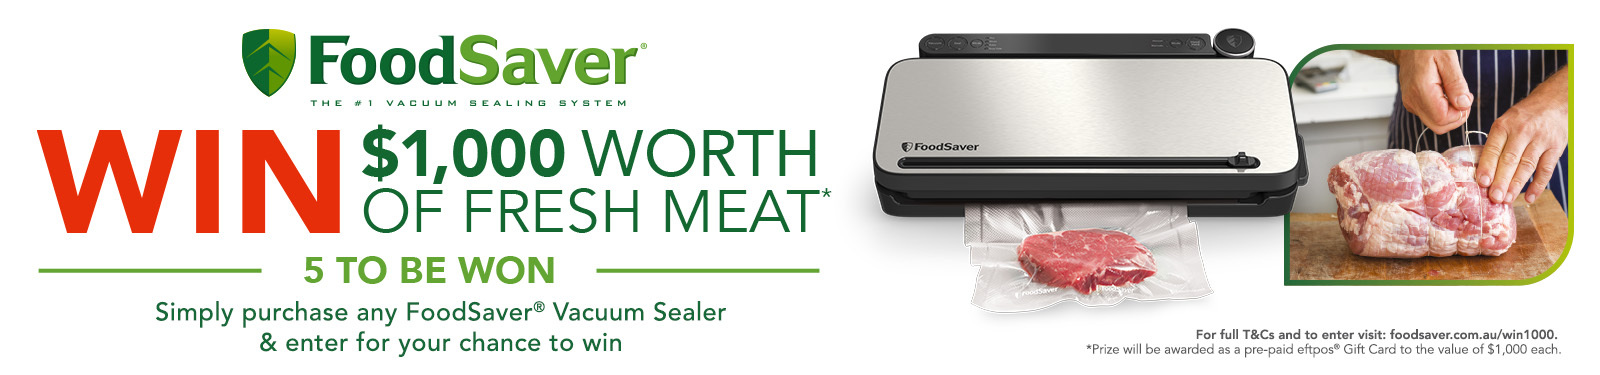 Chance To Win $1k Worth Of Fresh Meat With FoodSaver